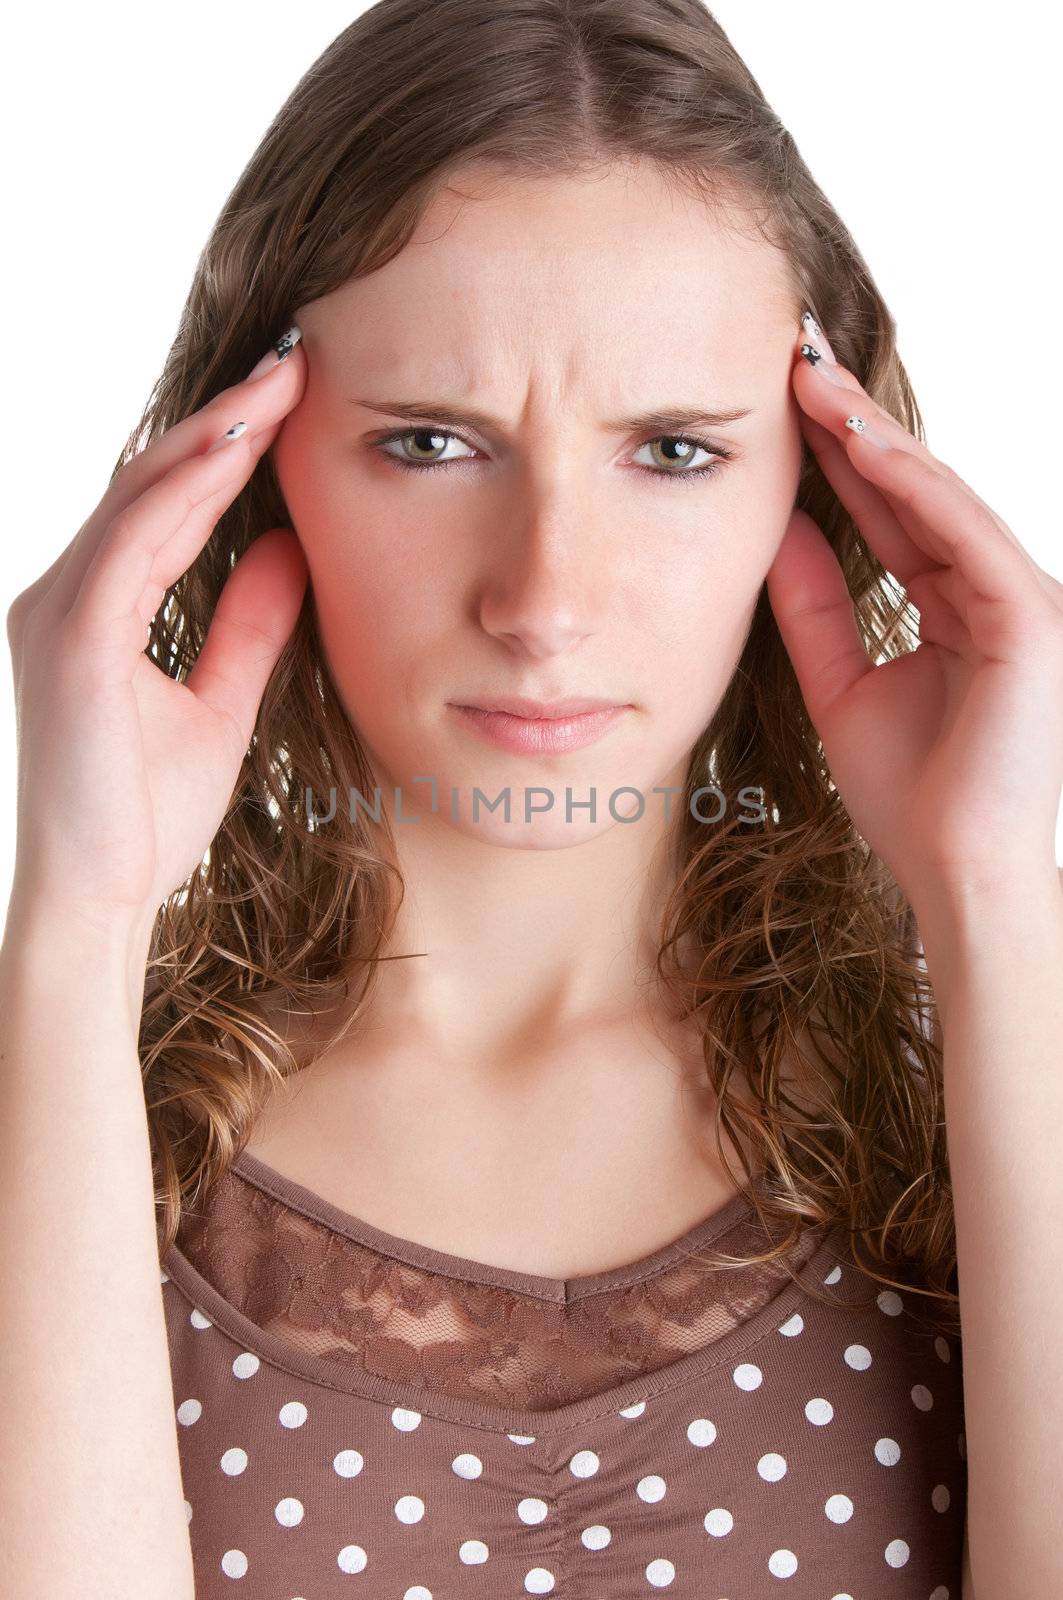 Woman suffering from an headache, holding her hands to the head, isolated in a white background